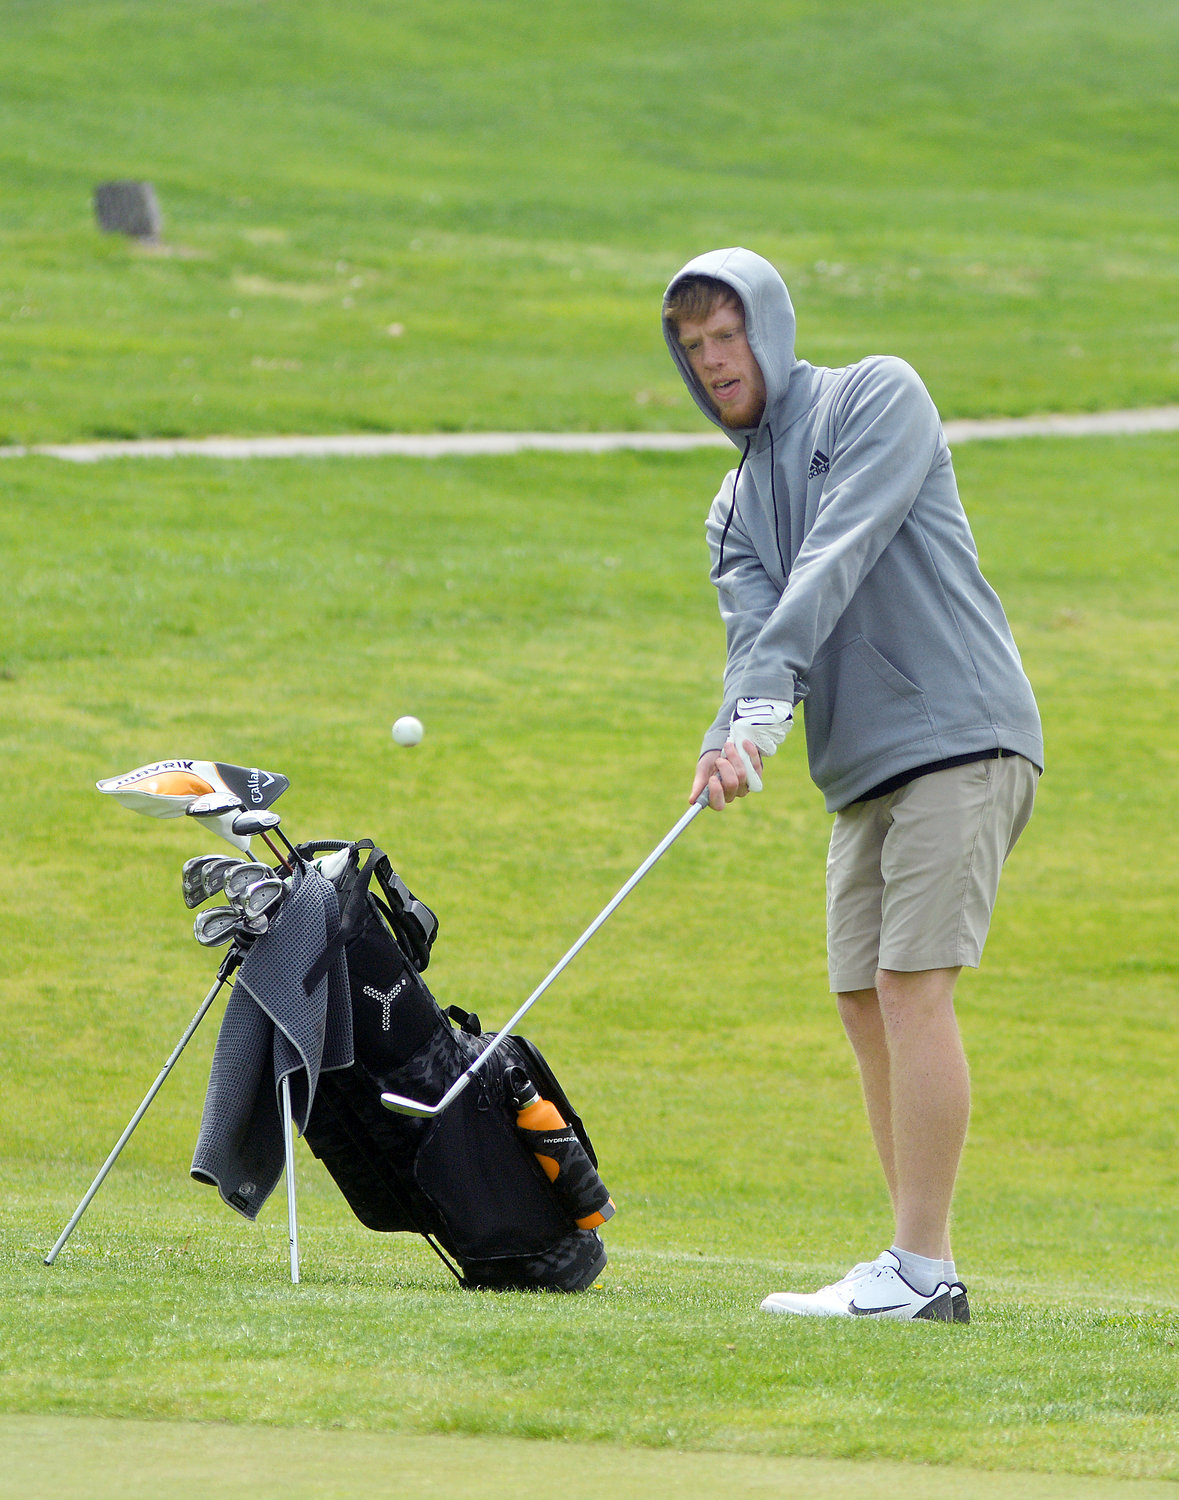 Charlie Whelan (below) chips his ball safely on to the green for Cullen VanLeer’s Dutchmen golf team.